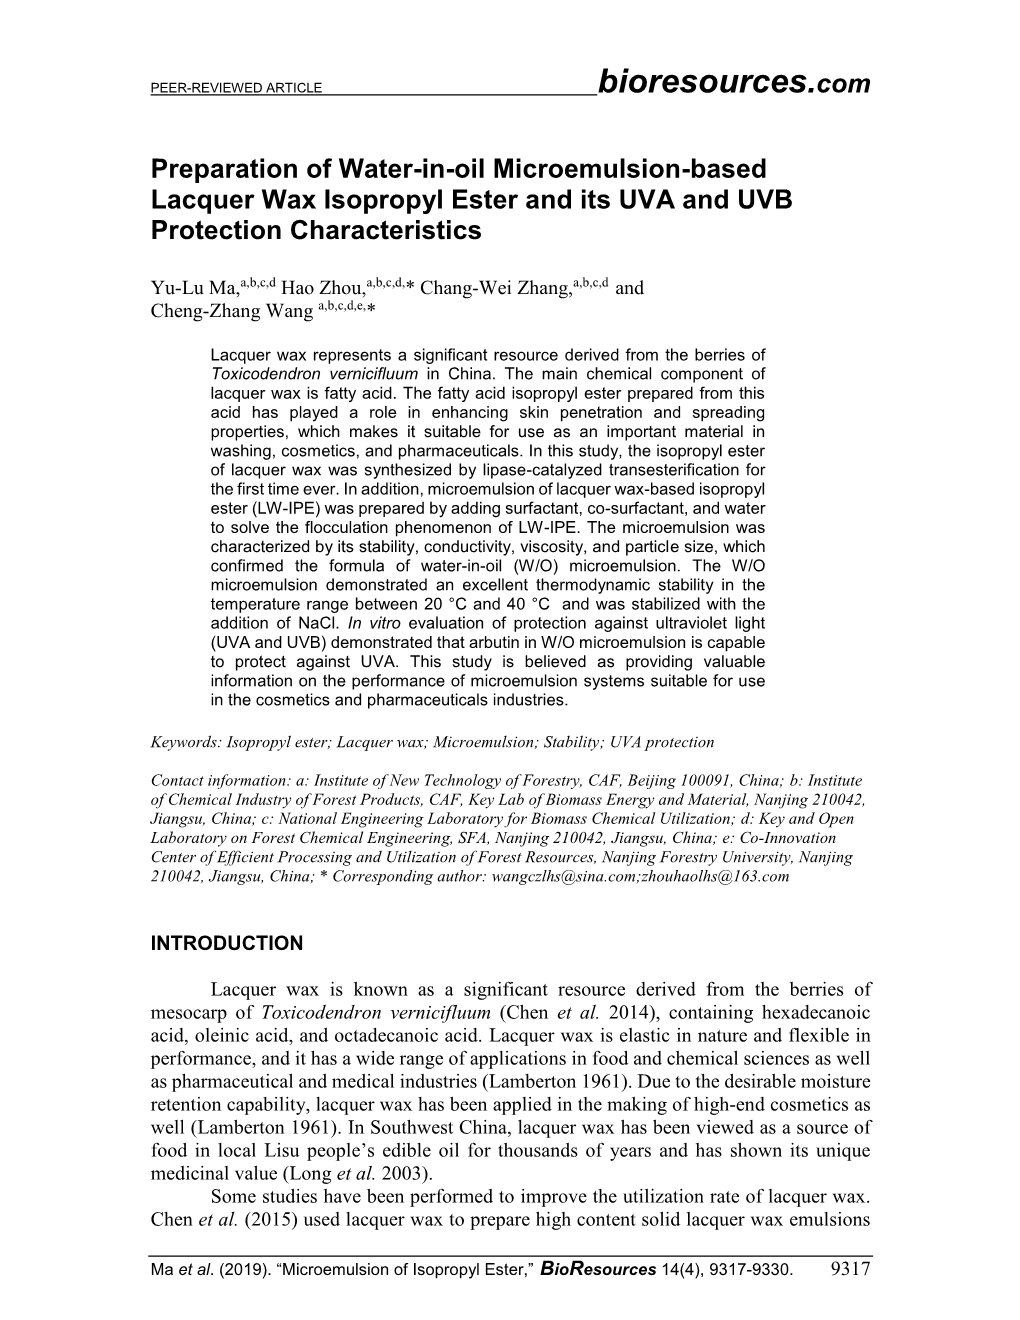 Preparation of Water-In-Oil Microemulsion-Based Lacquer Wax Isopropyl Ester and Its UVA and UVB Protection Characteristics